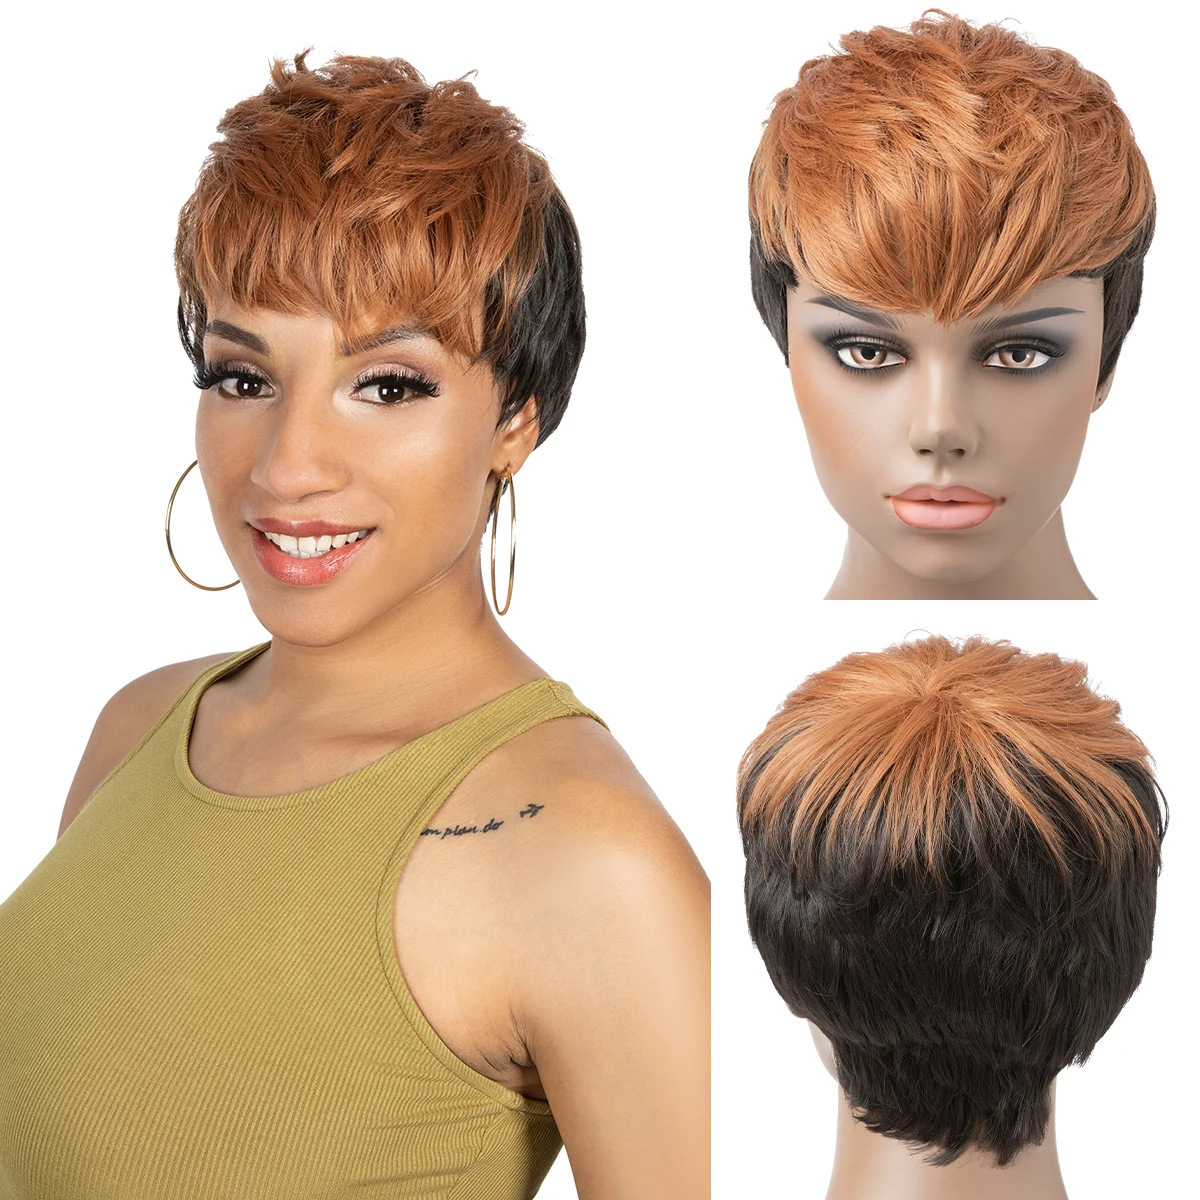 

Afro Cheap Short Pixie Cut Hair Wig Synthetic With Bang For Black Women Female High Qulaity Ginger Brown Natural Full Machine